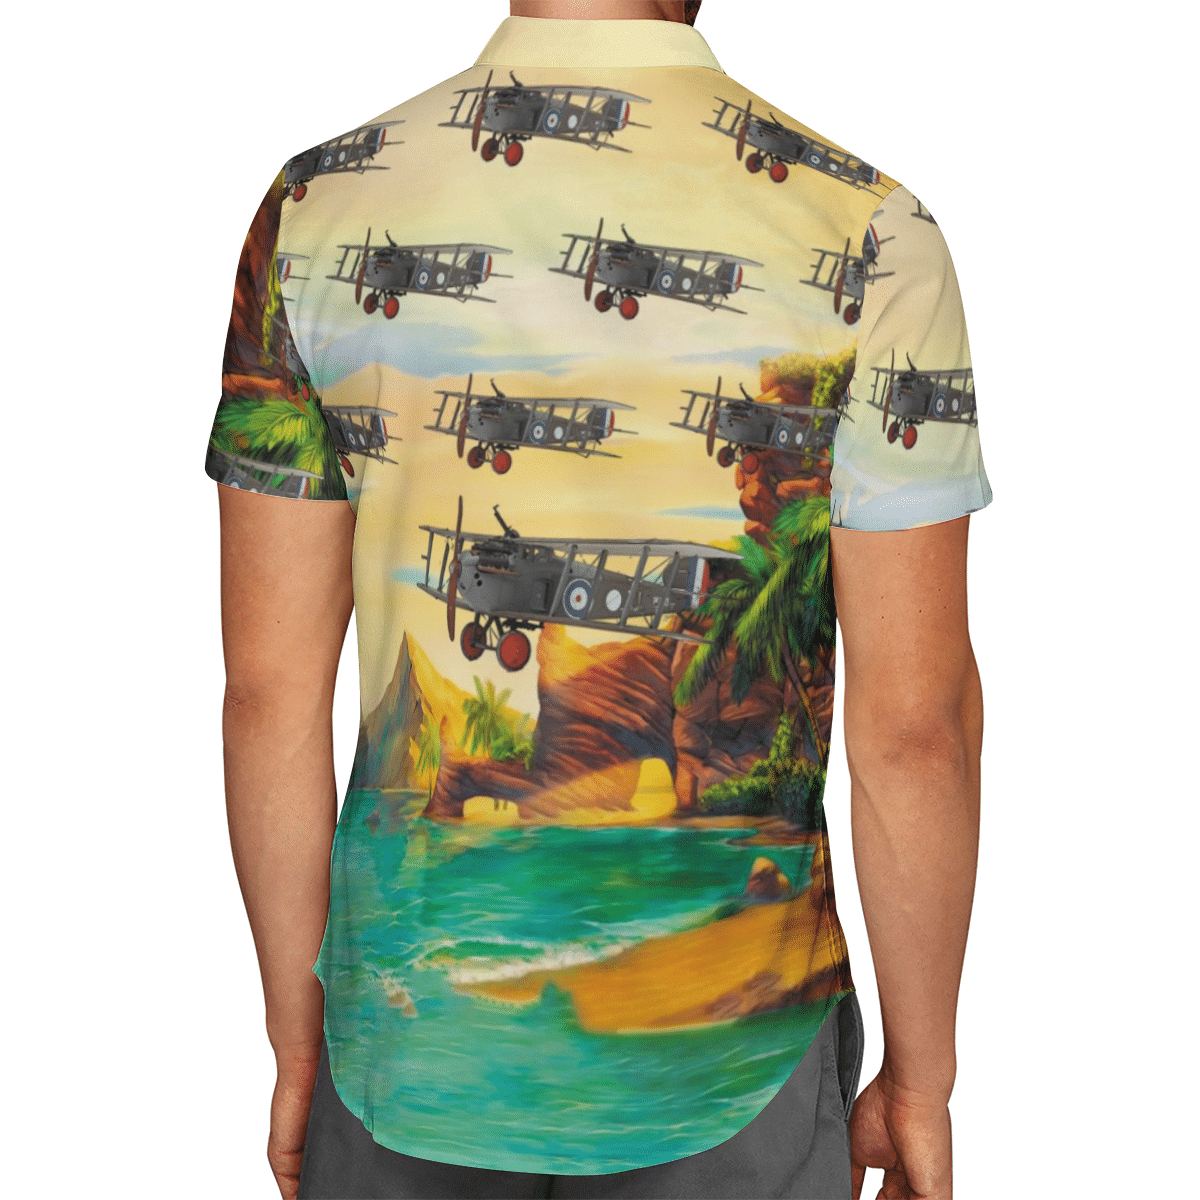 Going to the beach with a quality shirt 225